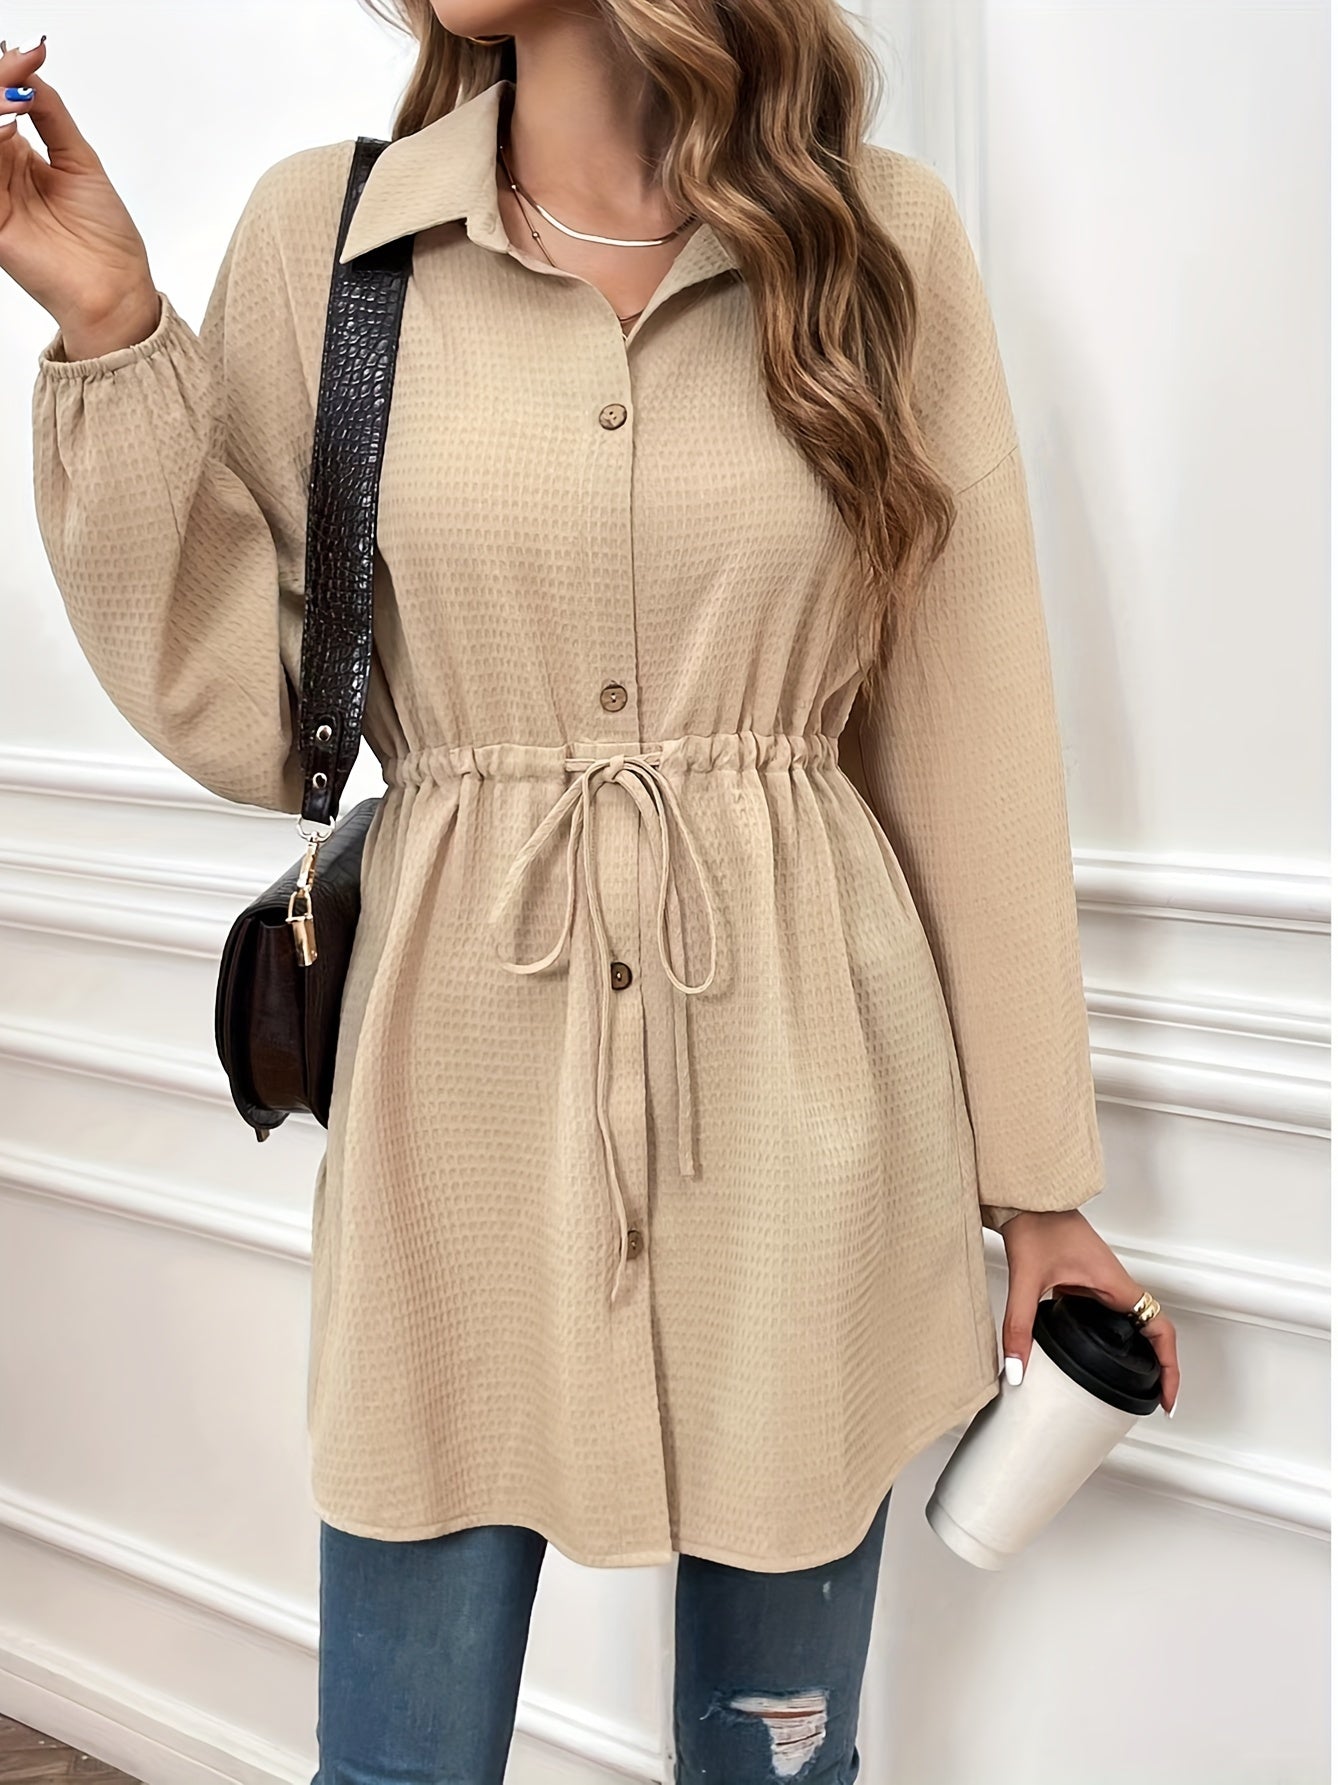 Antmvs Plus Size Casual Blouse, Women's Plus Solid Waffle Pattern Button Up Long Sleeve Turn Down Collar Drawstring Nipped Waist Blouse